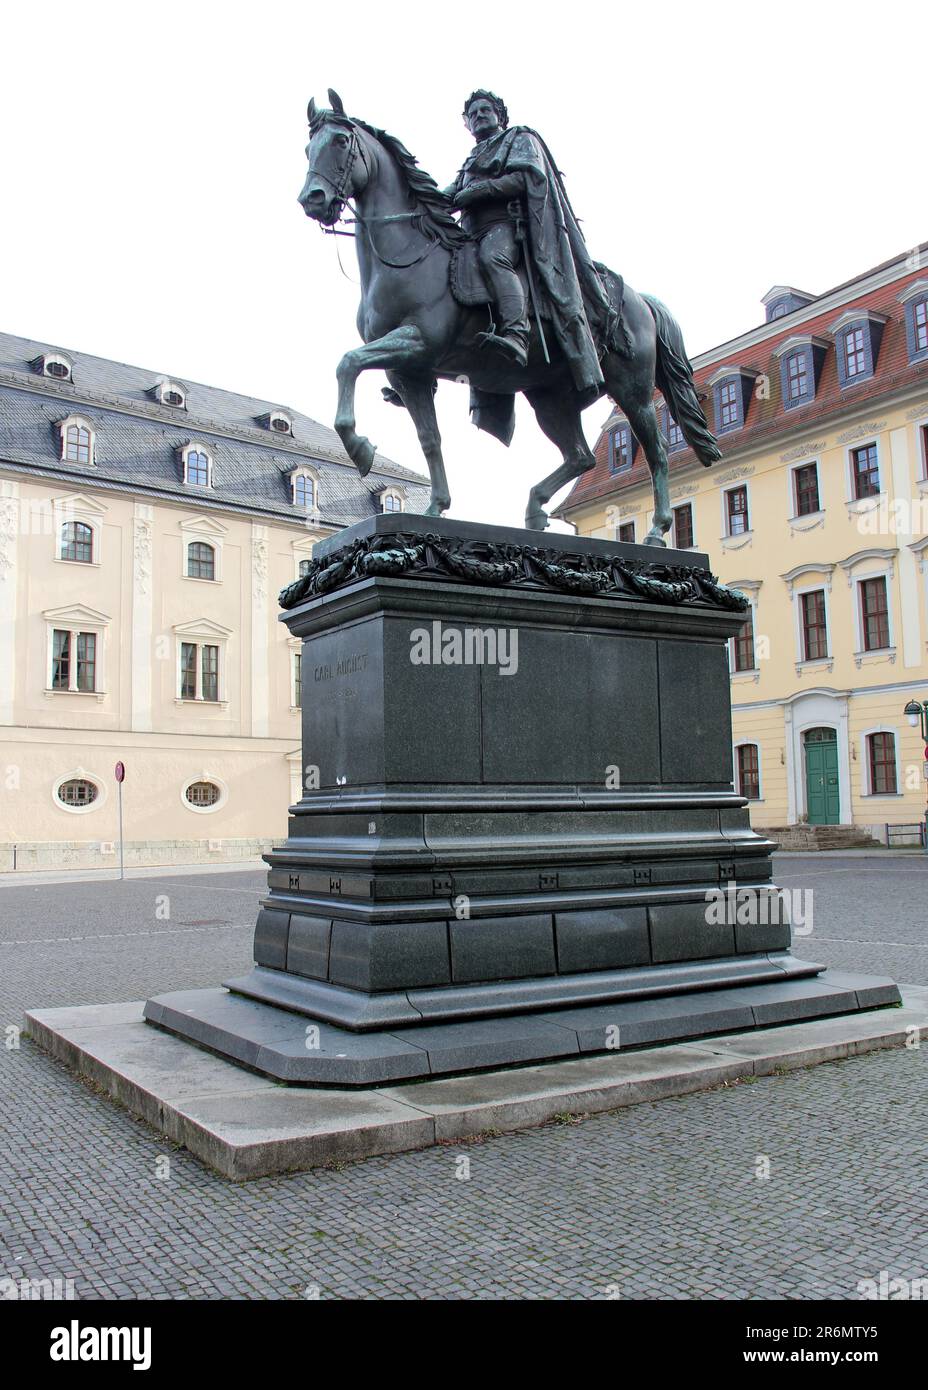 Equestrian statue of the Duke Karl August, in the Democracy Square, sculptural work by Adolf von Donndorf, created in 1875, Weimar, Germany Stock Photo